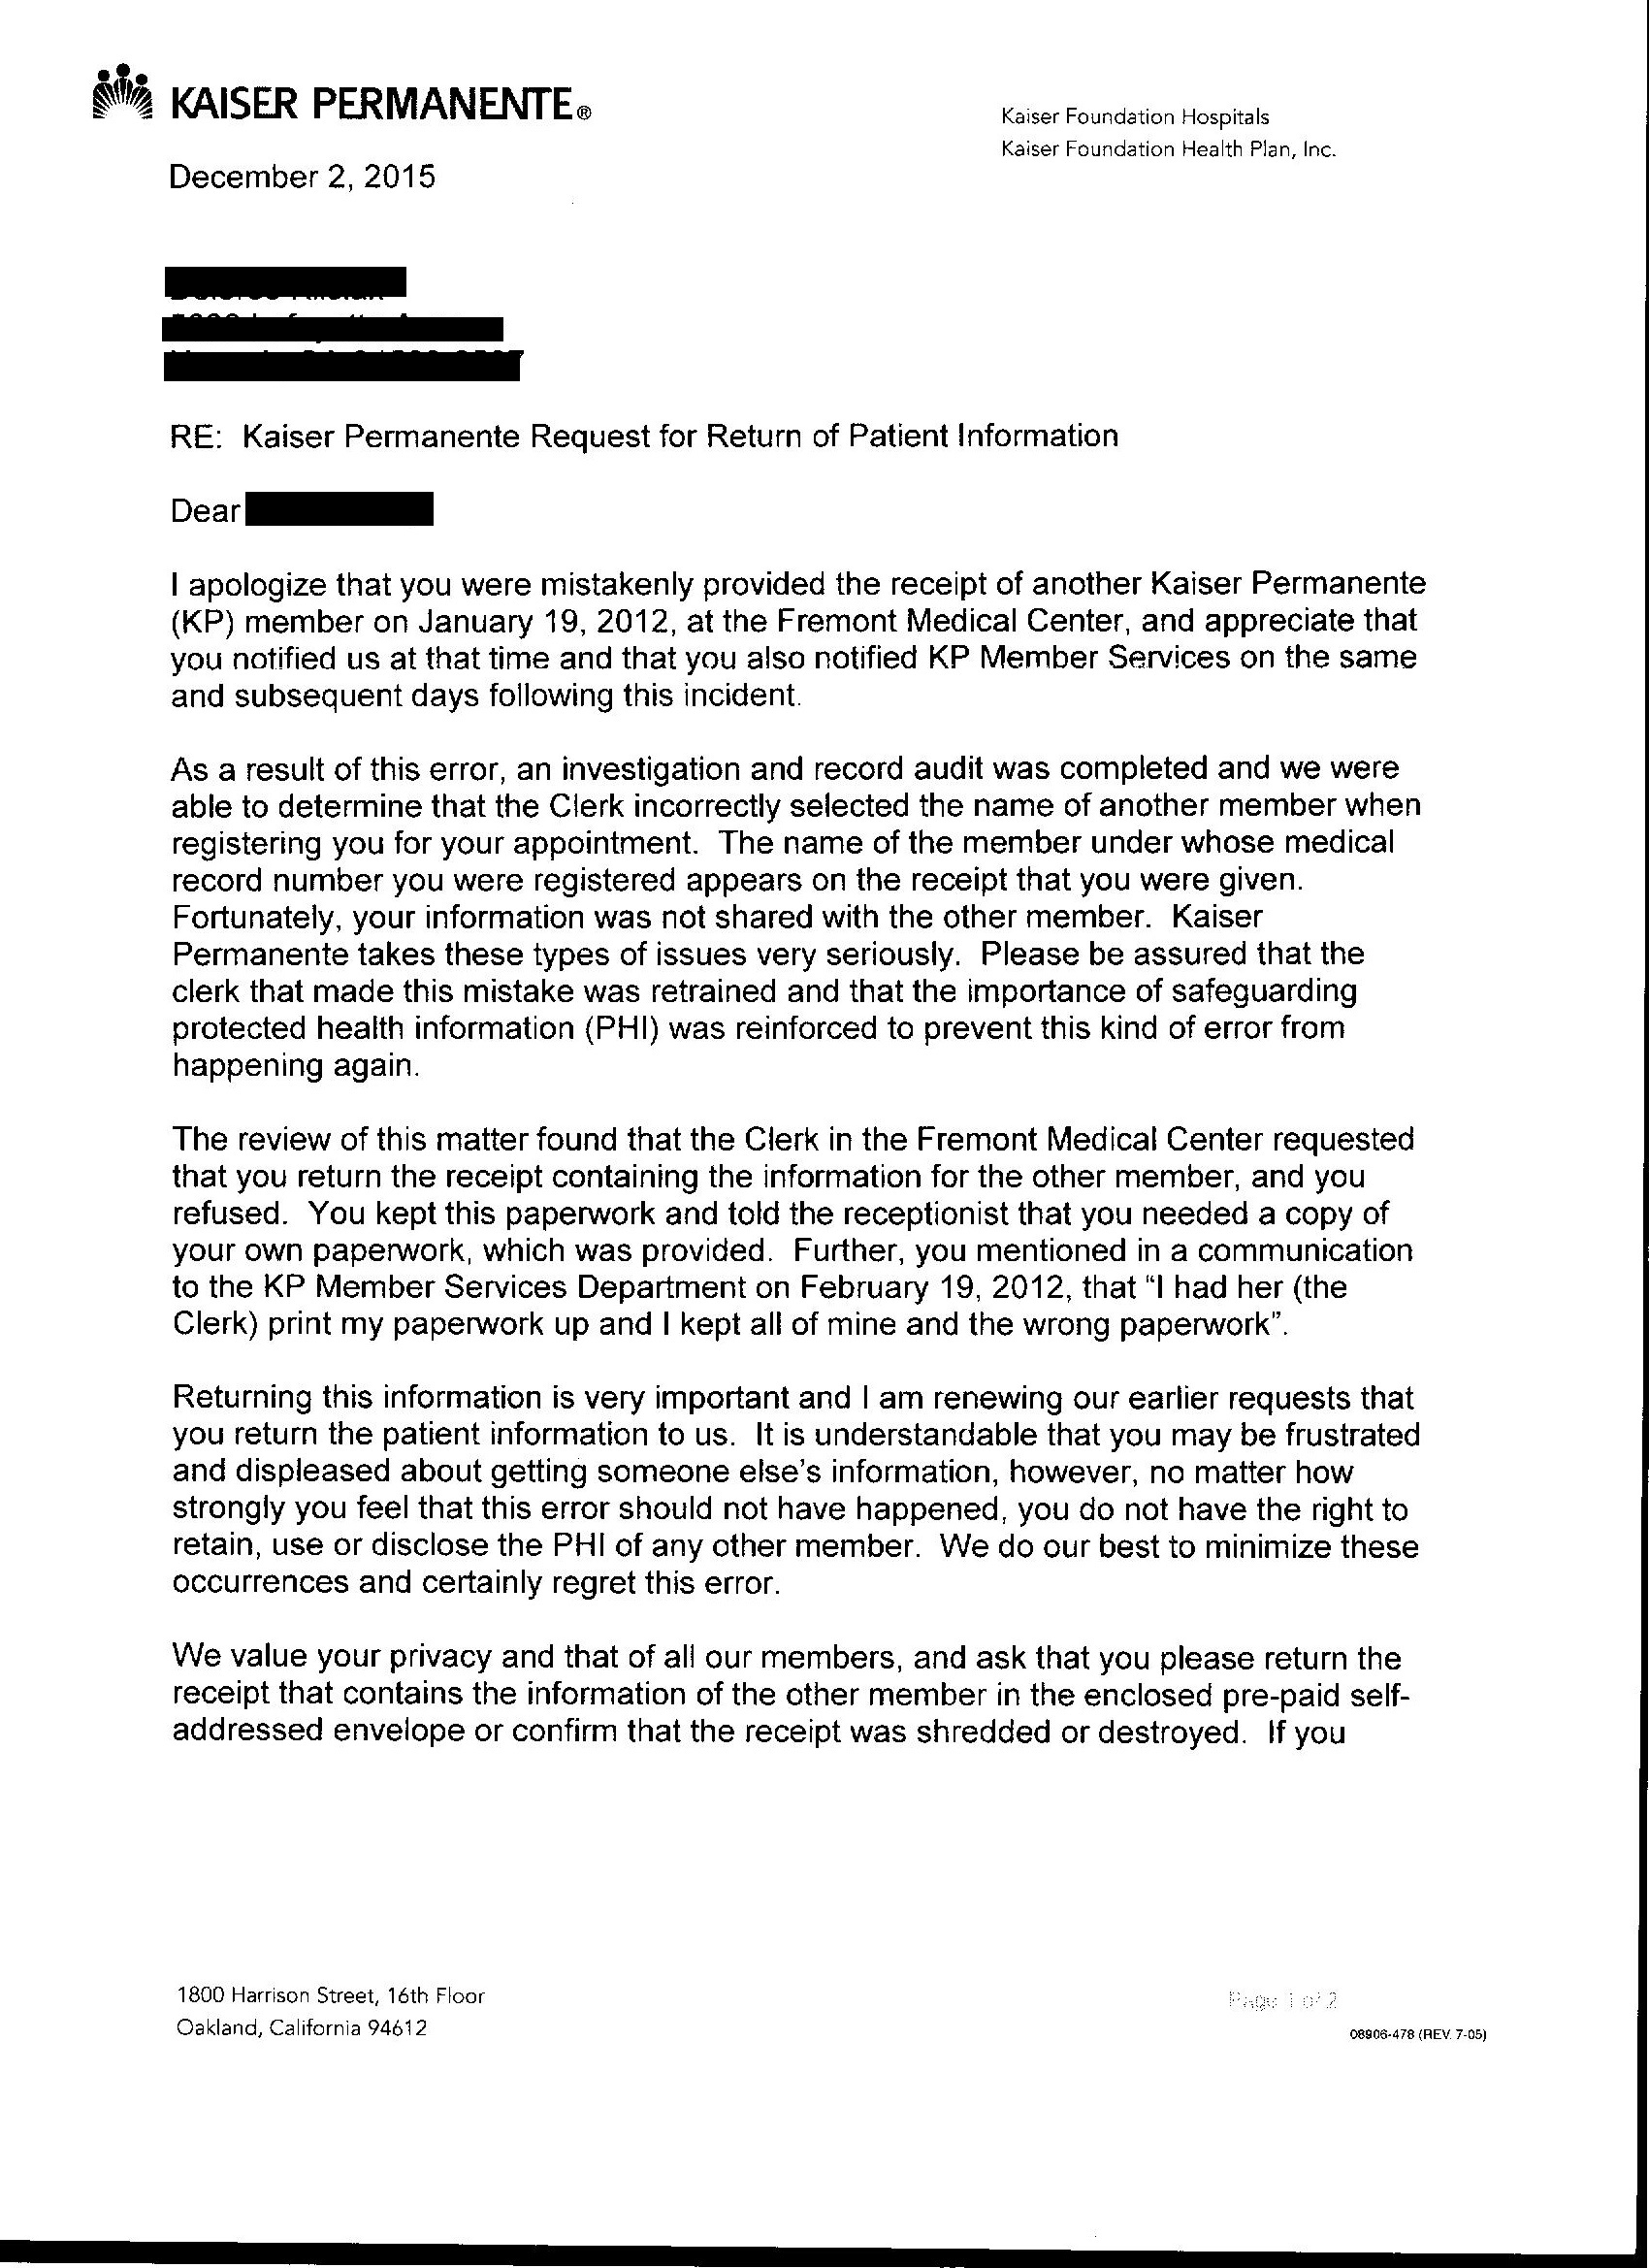 Letter from Kaiser Privacy Compliance Program Manager